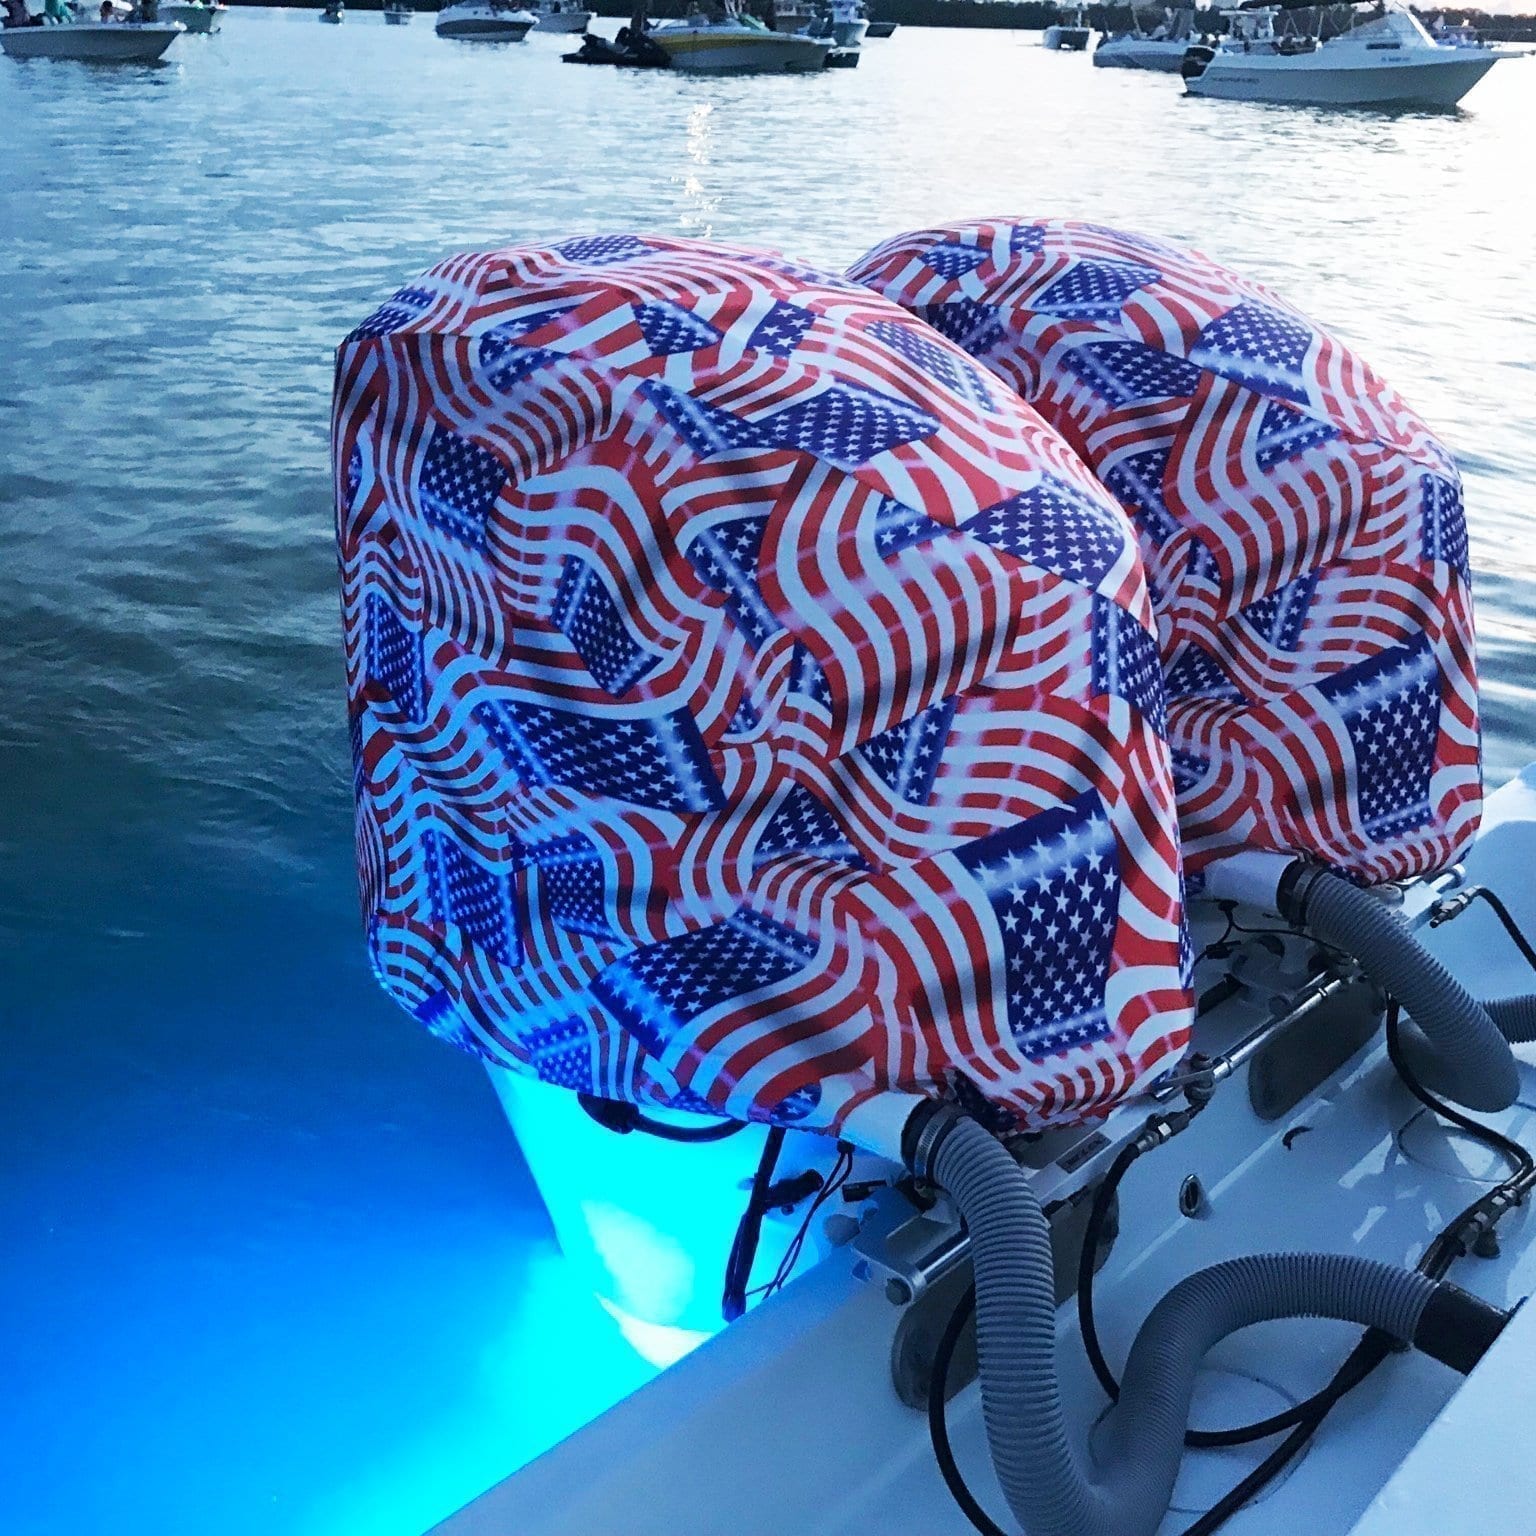 Made in USA to Stay on While You Run! OUTERENVY American Patriot Outboard Motor Cover for Yamaha Suzuki and Mercury